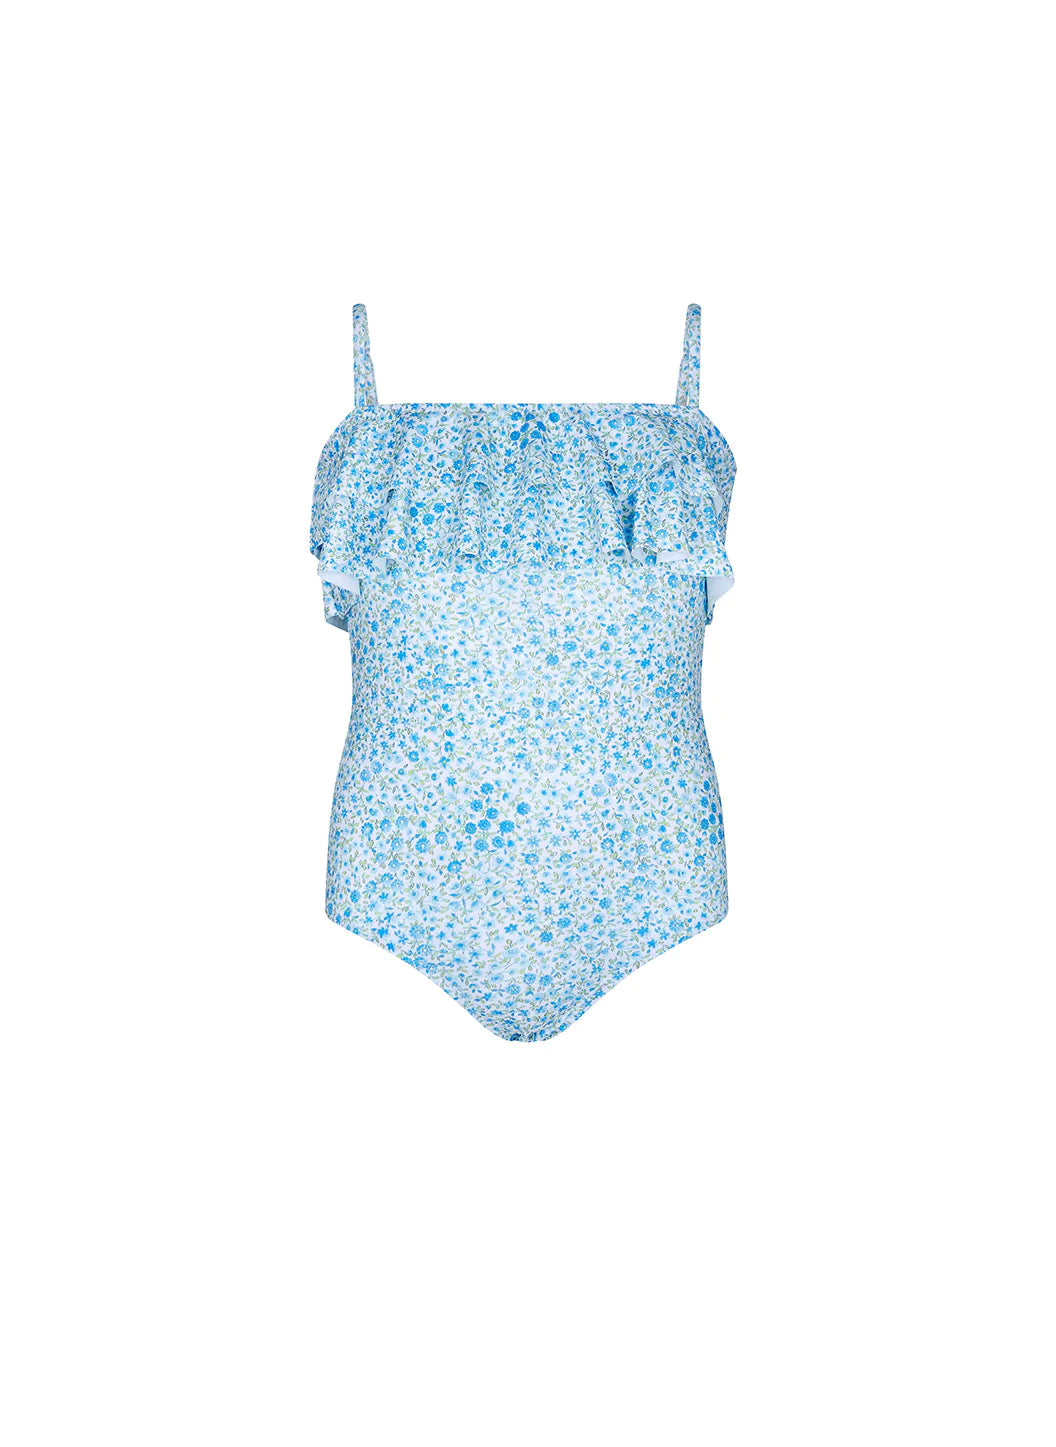 Baby_Ivy_Blue_Floral_Swimsuit_Cutout_2023